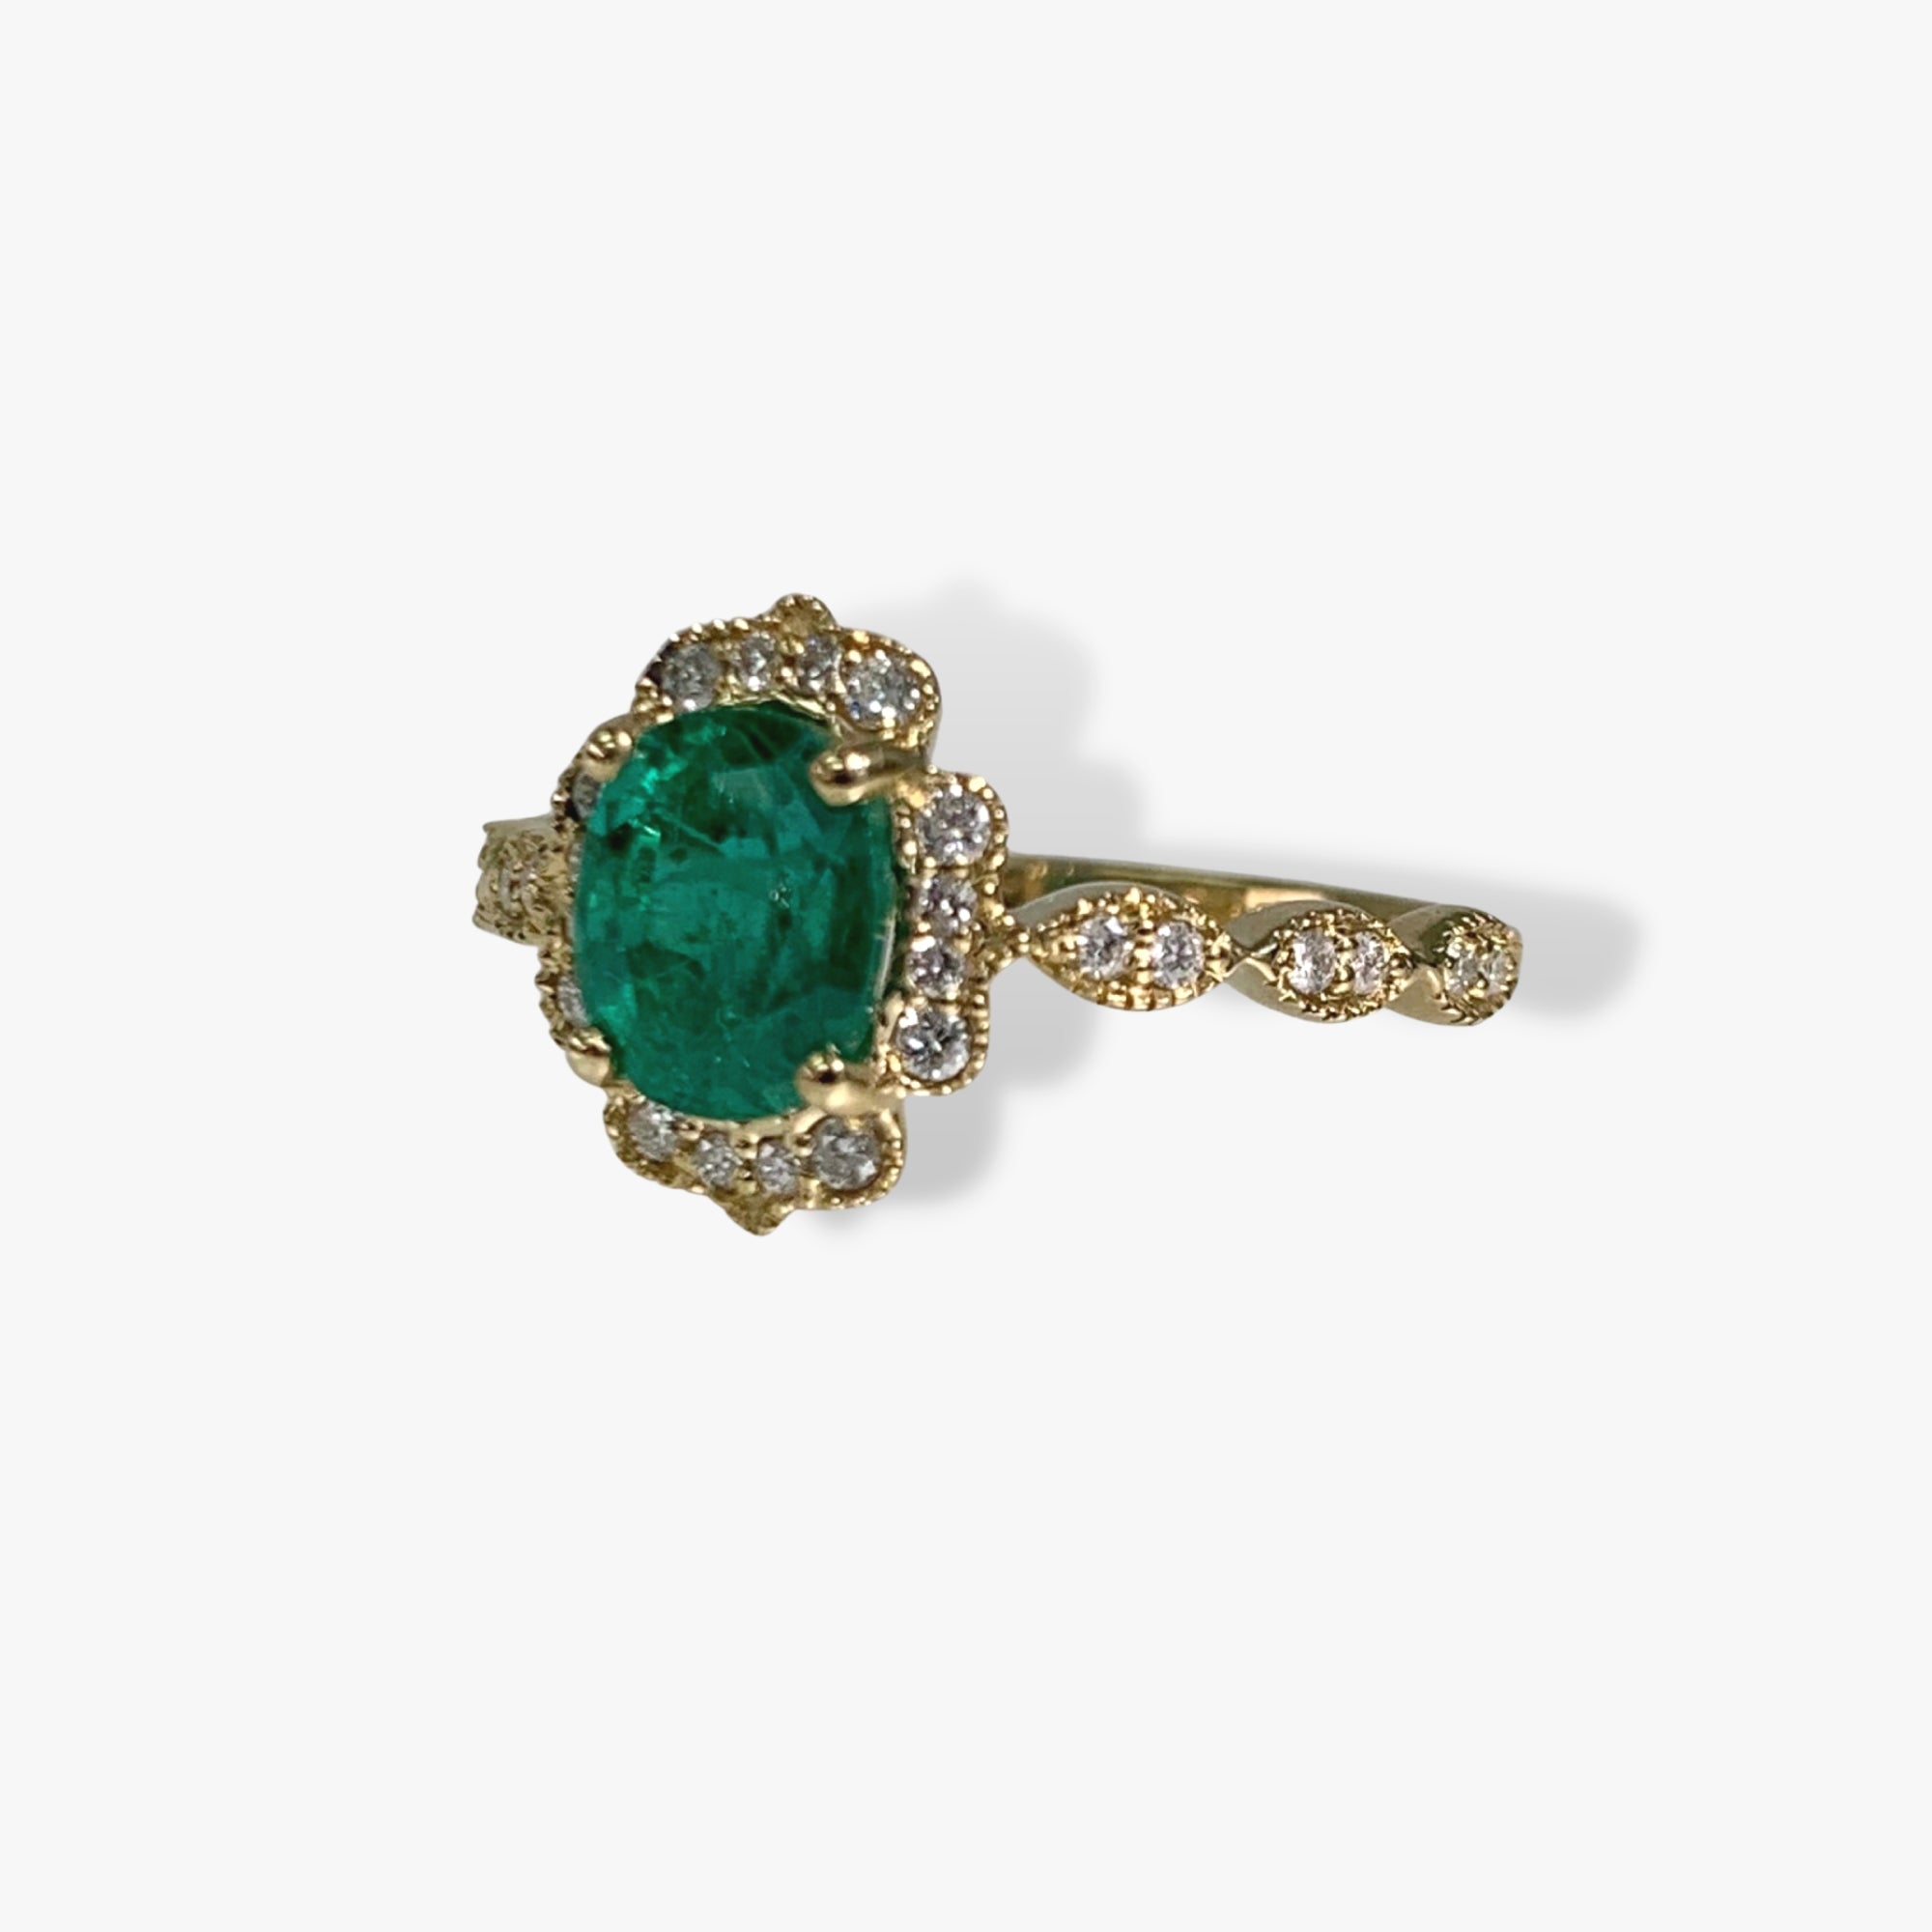 14k Yellow Gold Oval Cut Emerald and Diamond Ring Side View